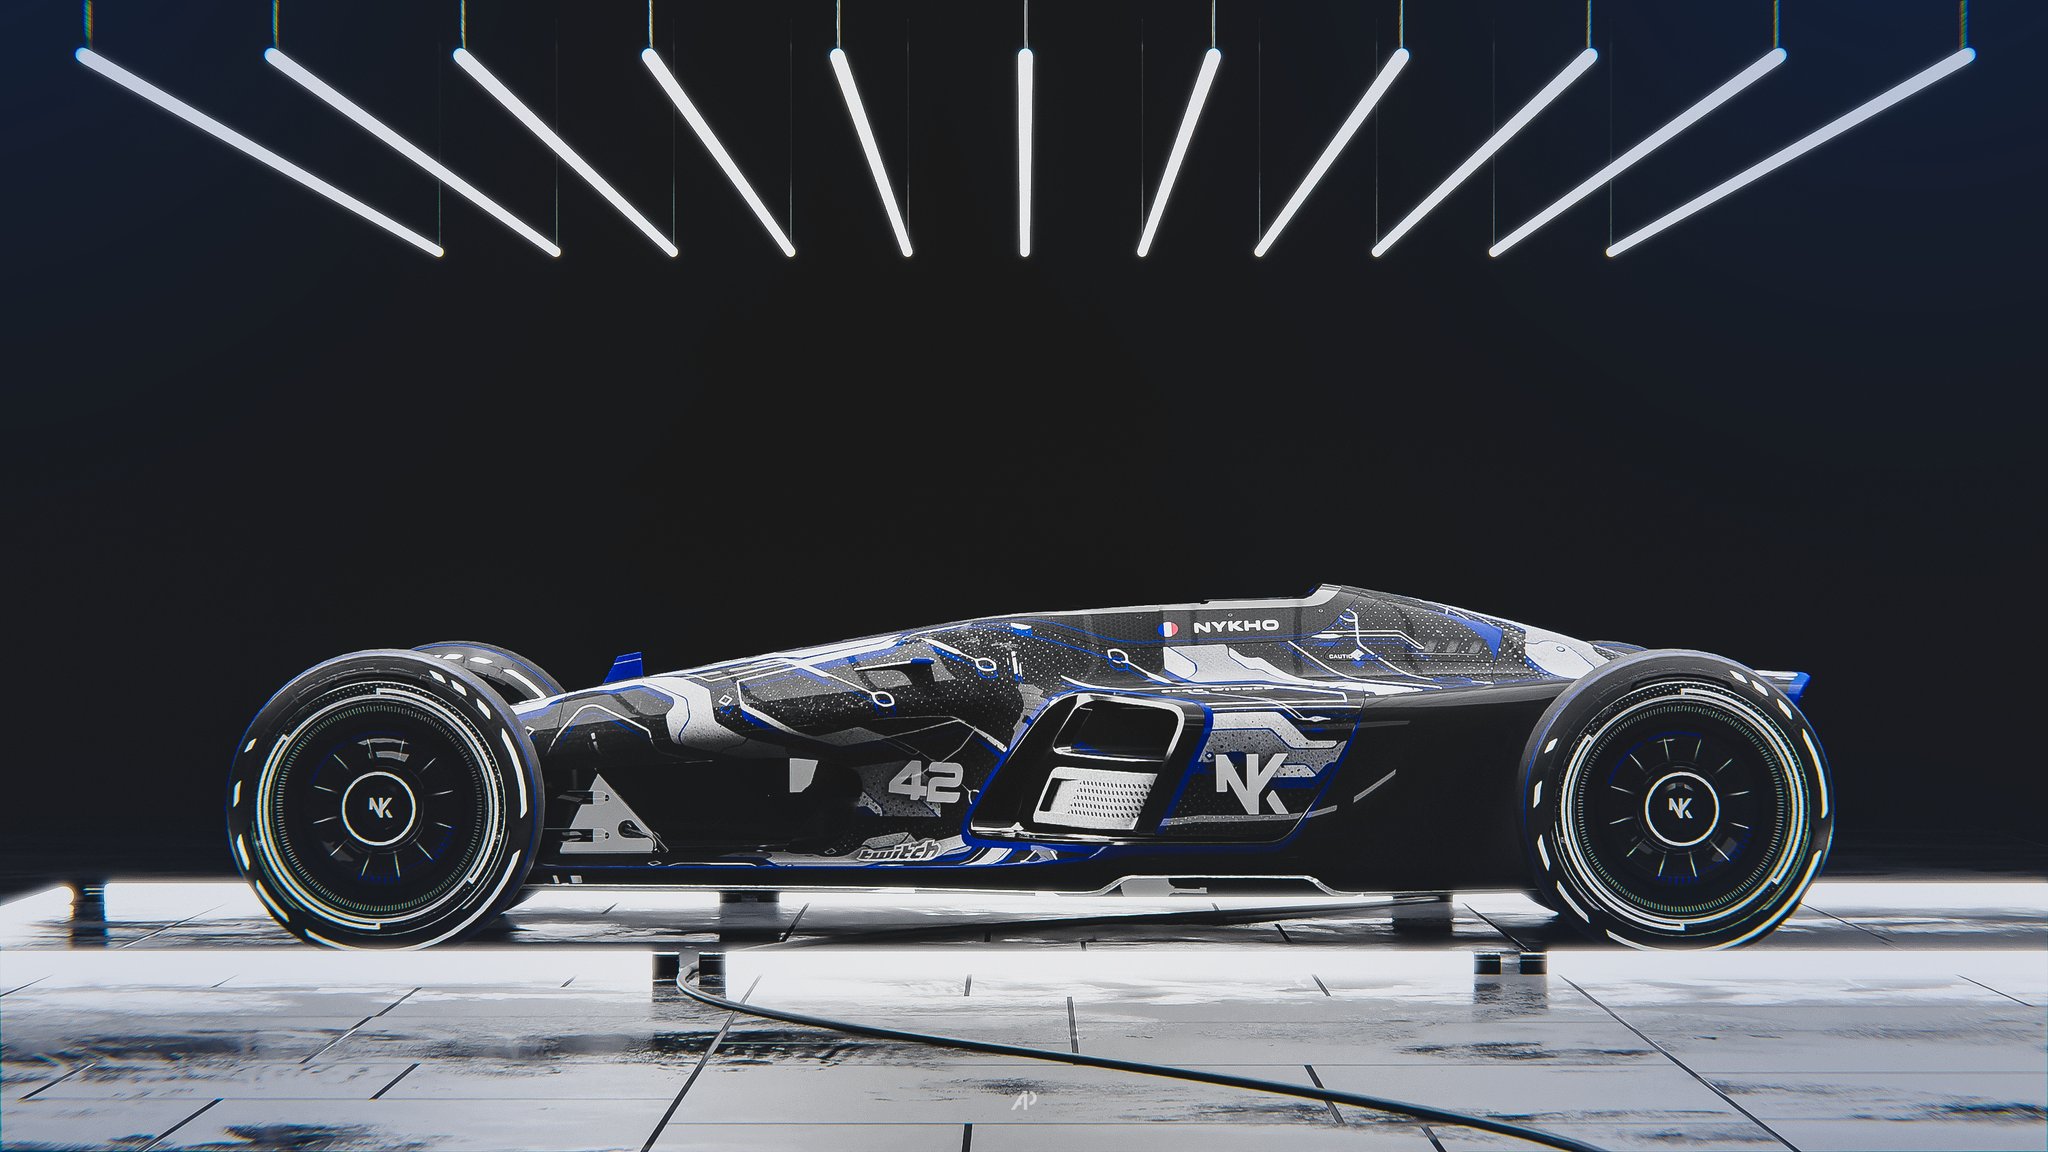 Nykho 2022 skin used during of the ZrT Trackmania Cup 2022